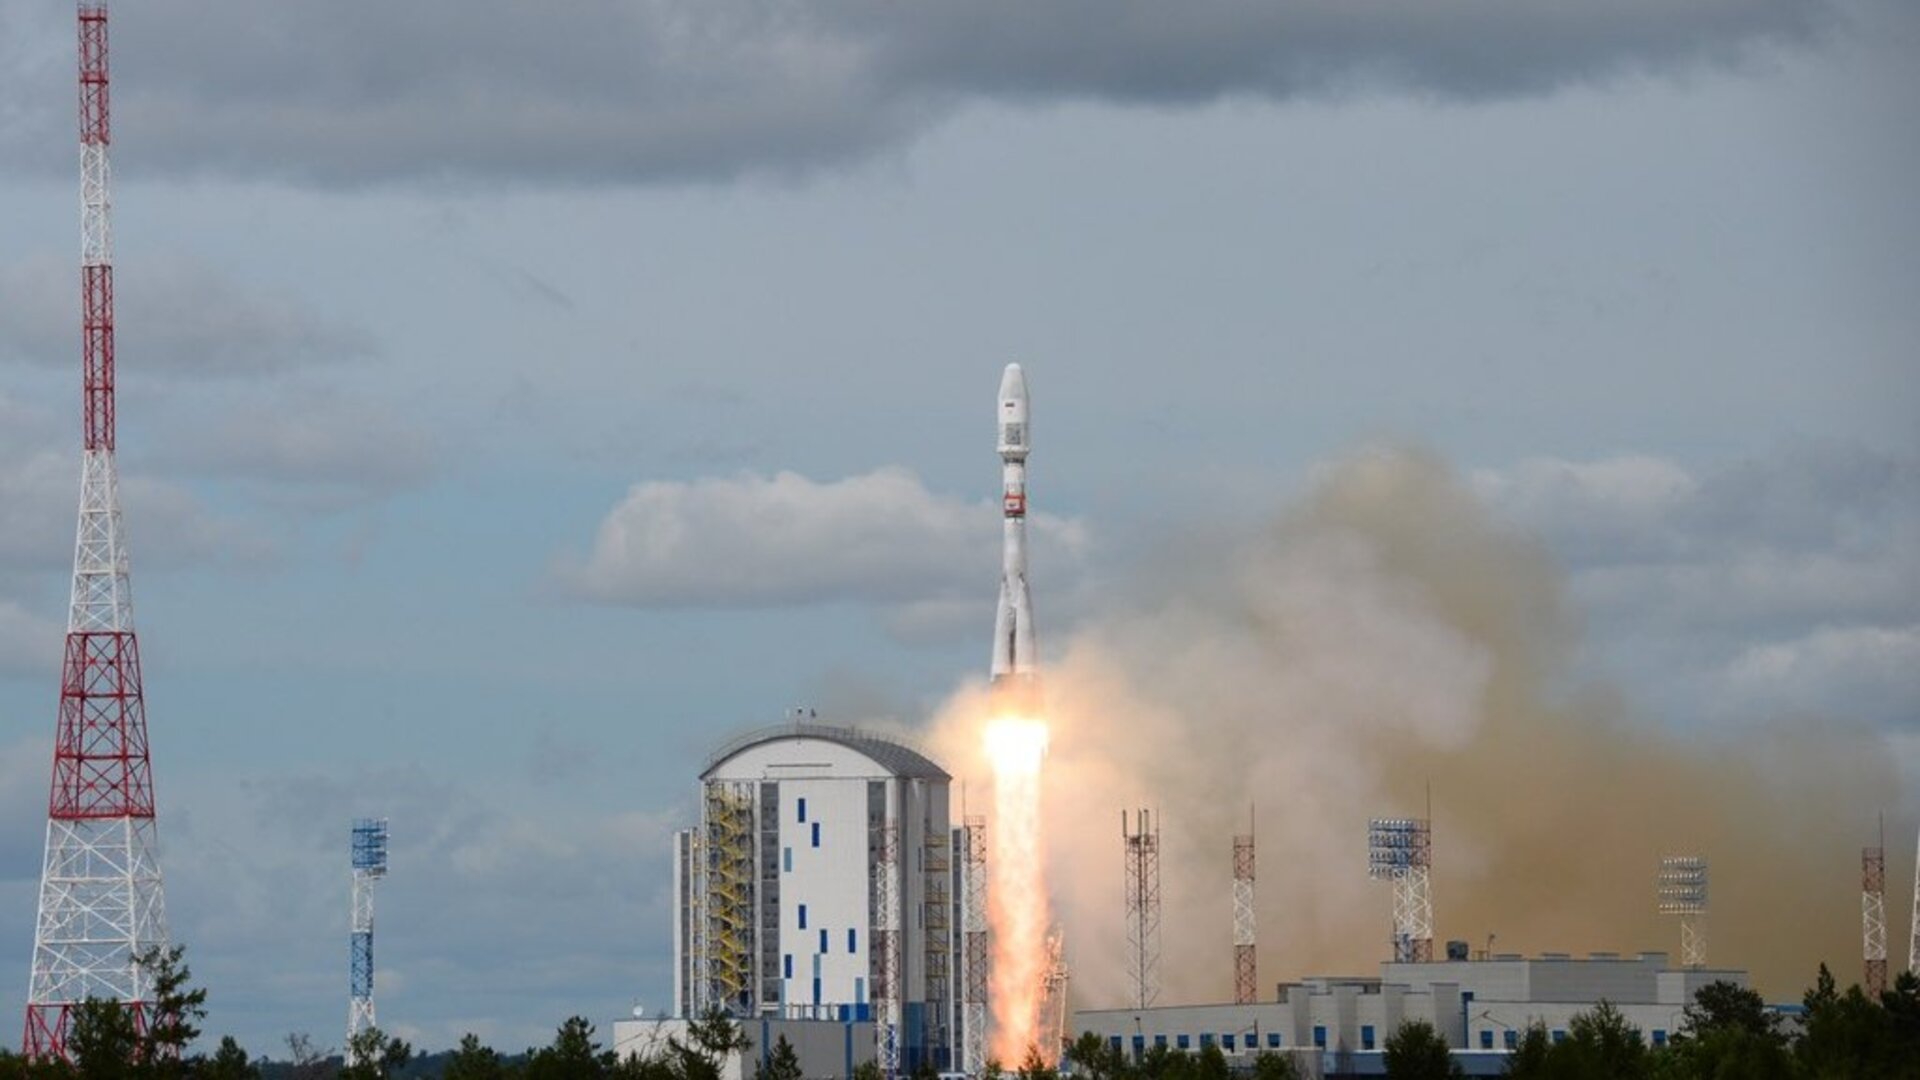 The Pioneer satellites were launched on board a Soyuz